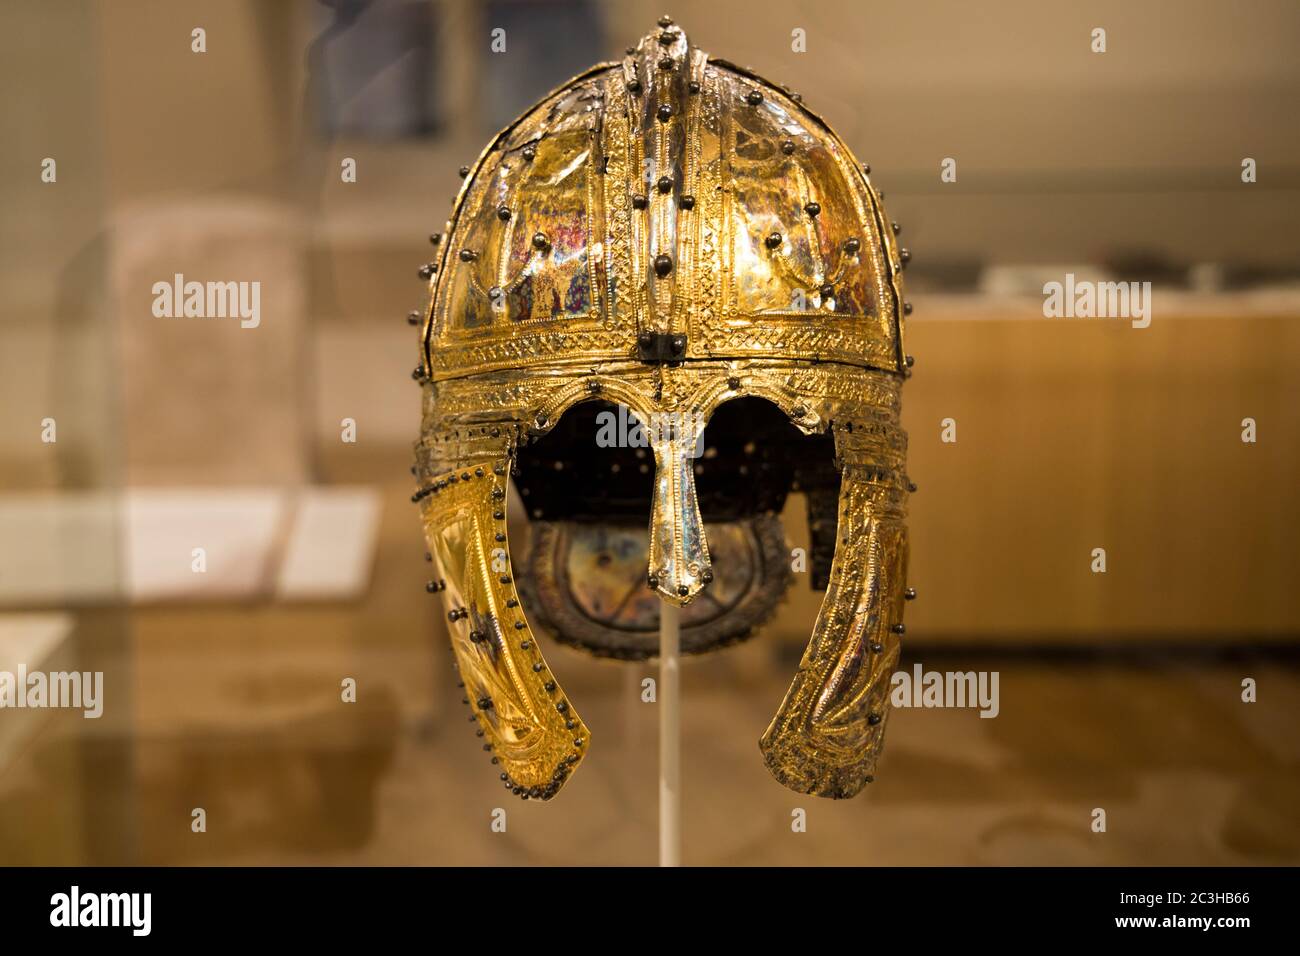 Leiden, The Netherlands - DEC 04, 2020: an ancient gilded silver equestrian helmet from a roman soldier. The helm is found in the Dutch city Peel. Stock Photo